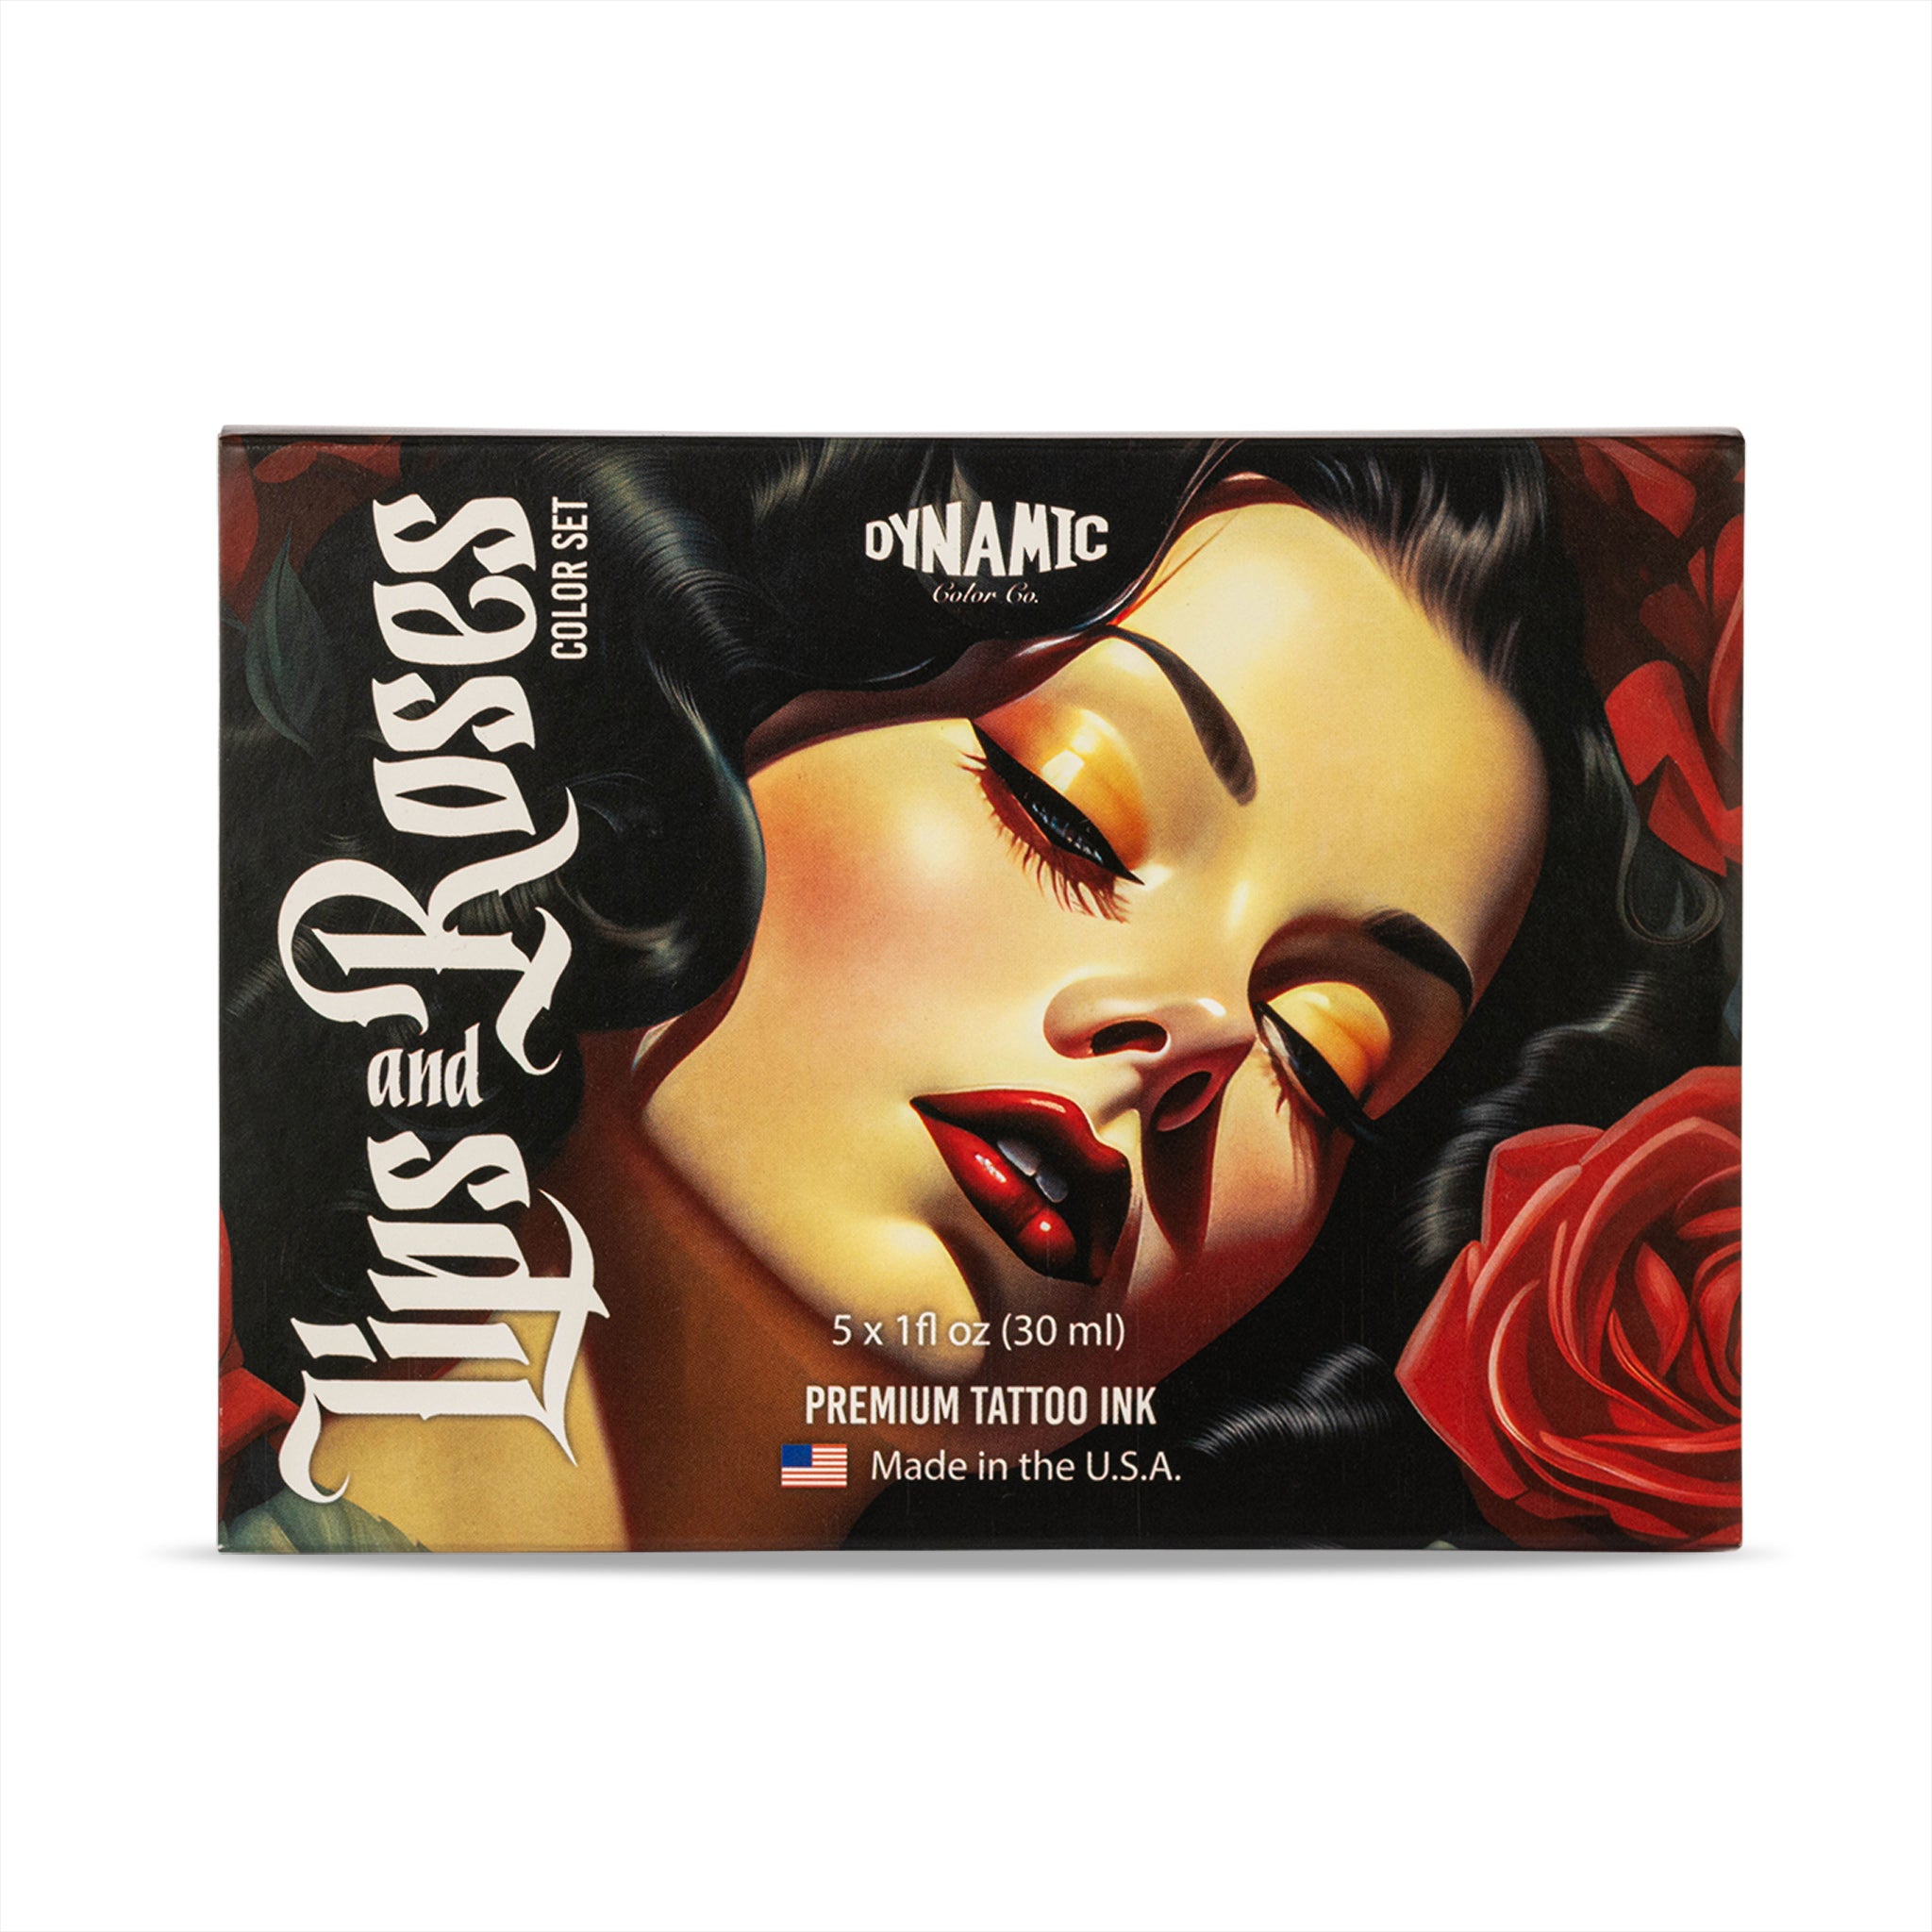 Dynamic Set Lips and Roses Tattoo Ink 1 oz.